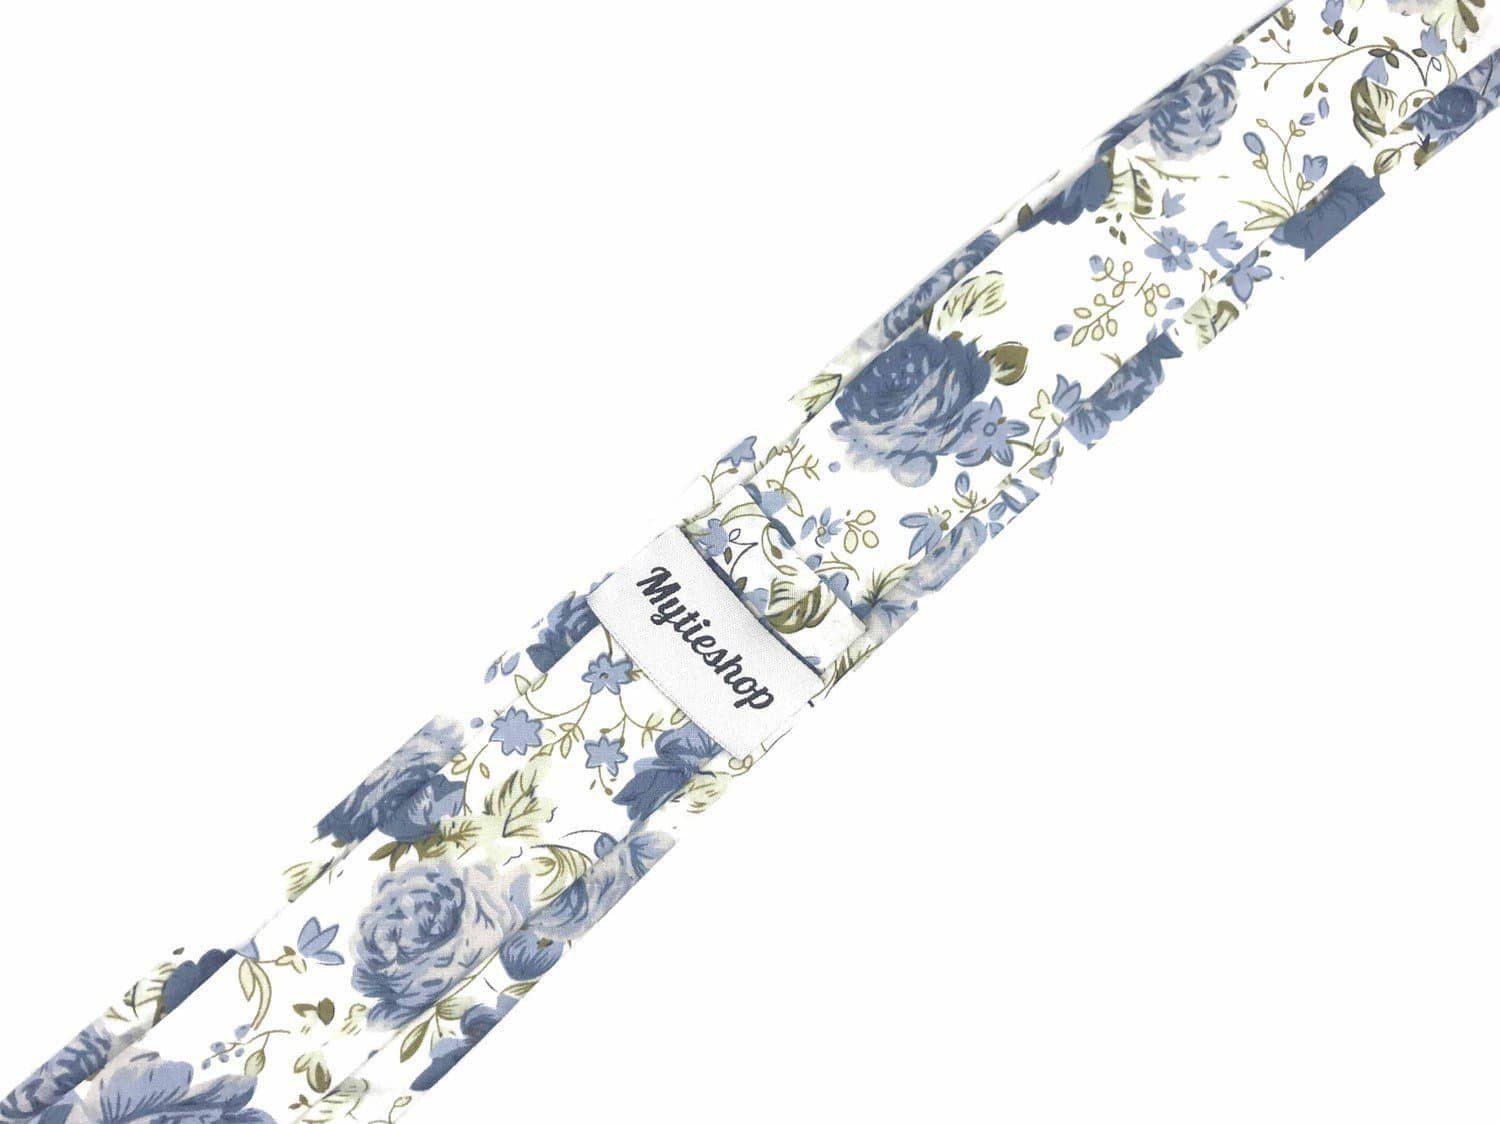 White floral skinny tie 2.36&quot; SAM - MYTIESHOP | toile de jouy floral tie wedding-Neckties-White floral skinny tie toile de jouy Sam floral skinny tie for weddings and prom great for groom and groomsmen elopement shoots and shoot wedding-Mytieshop. Skinny ties for weddings anniversaries. Father of bride. Groomsmen. Cool skinny neckties for men. Neckwear for prom, missions and fancy events. Gift ideas for men. Anniversaries ideas. Wedding aesthetics. Flower ties. Dry flower ties.